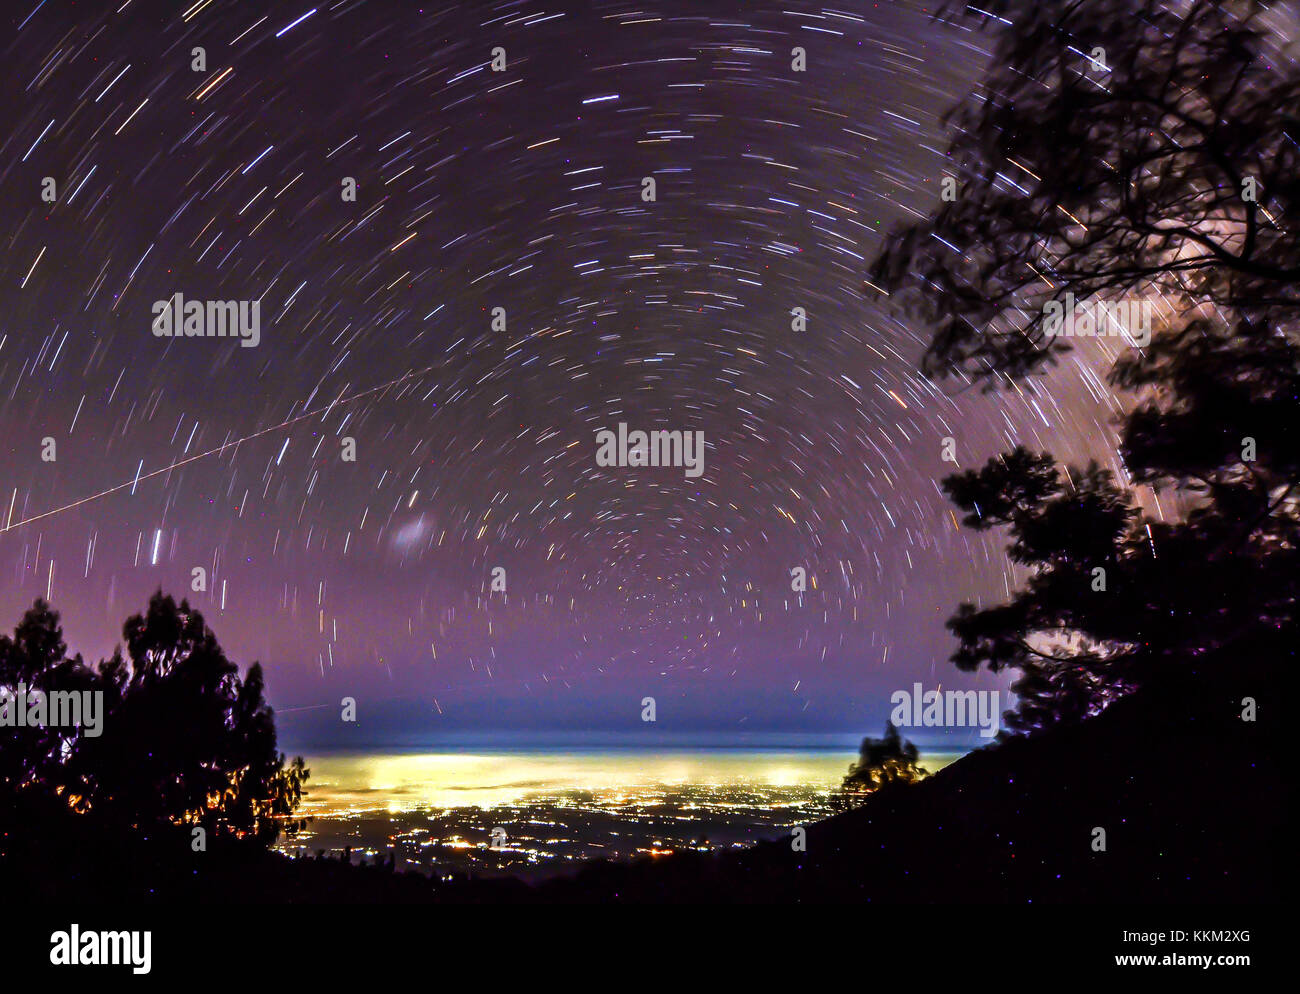 Star Trail in Kawah Ijen with the city of Banyuwangi in the background. Stock Photo